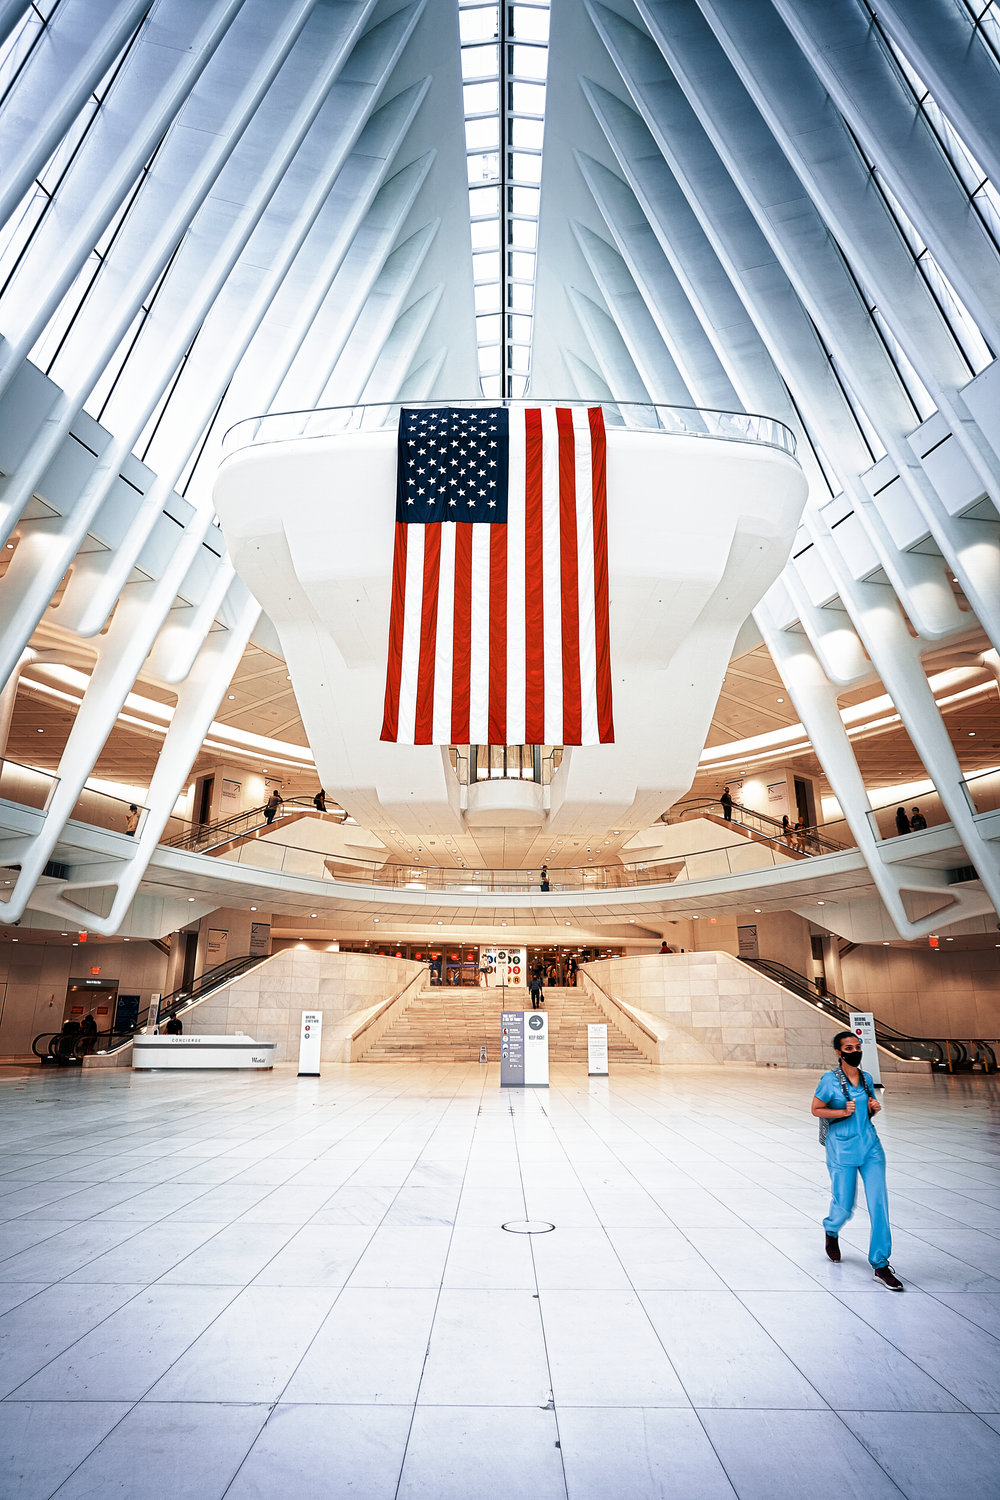 Joshua Abraham’s lauded photograph of a largely empty oculus at the World Trade Center on the anniversary of the Sept. 11 attacks is currently displayed at the International Center of Photography as a part of a series documenting the coronavirus pandemic in the city.